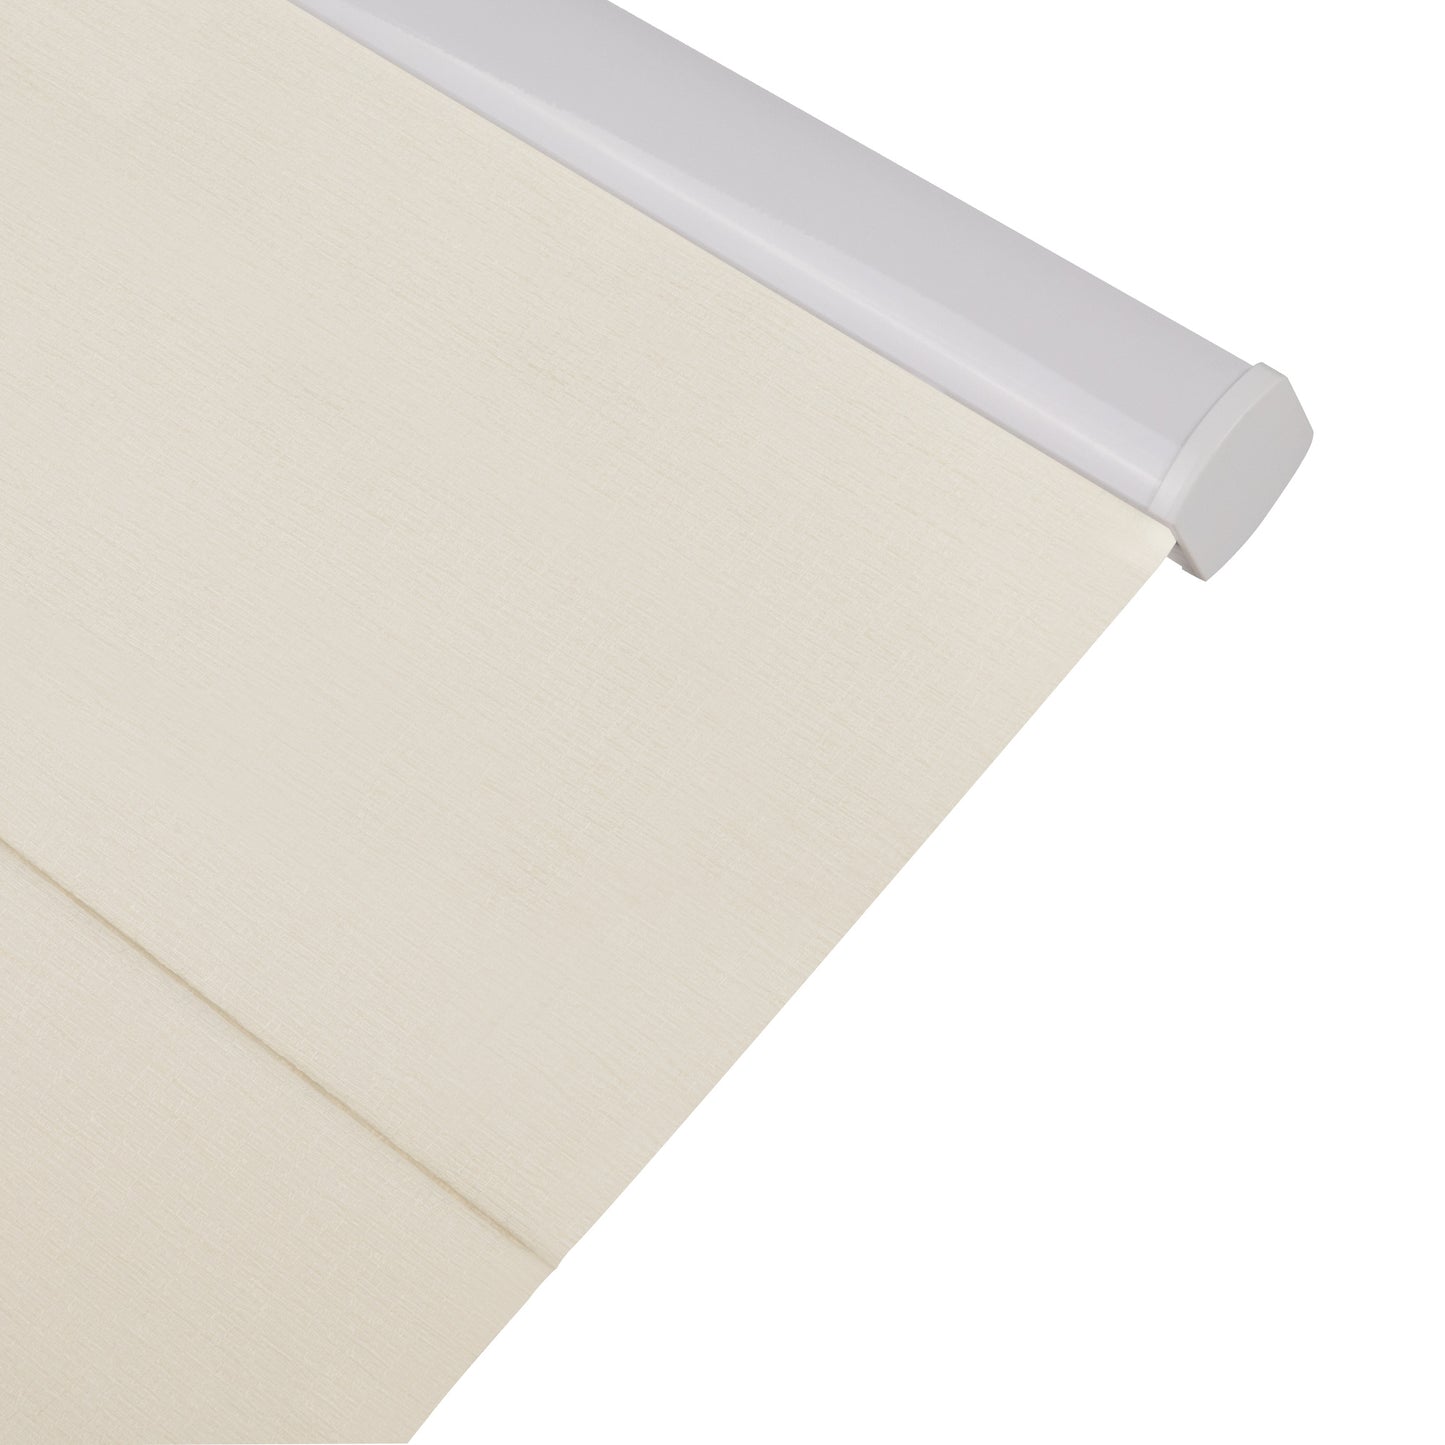 Close-up of a beige eco-friendly Roman blind with aluminum alloy lifting track from EaseEaseCurtains